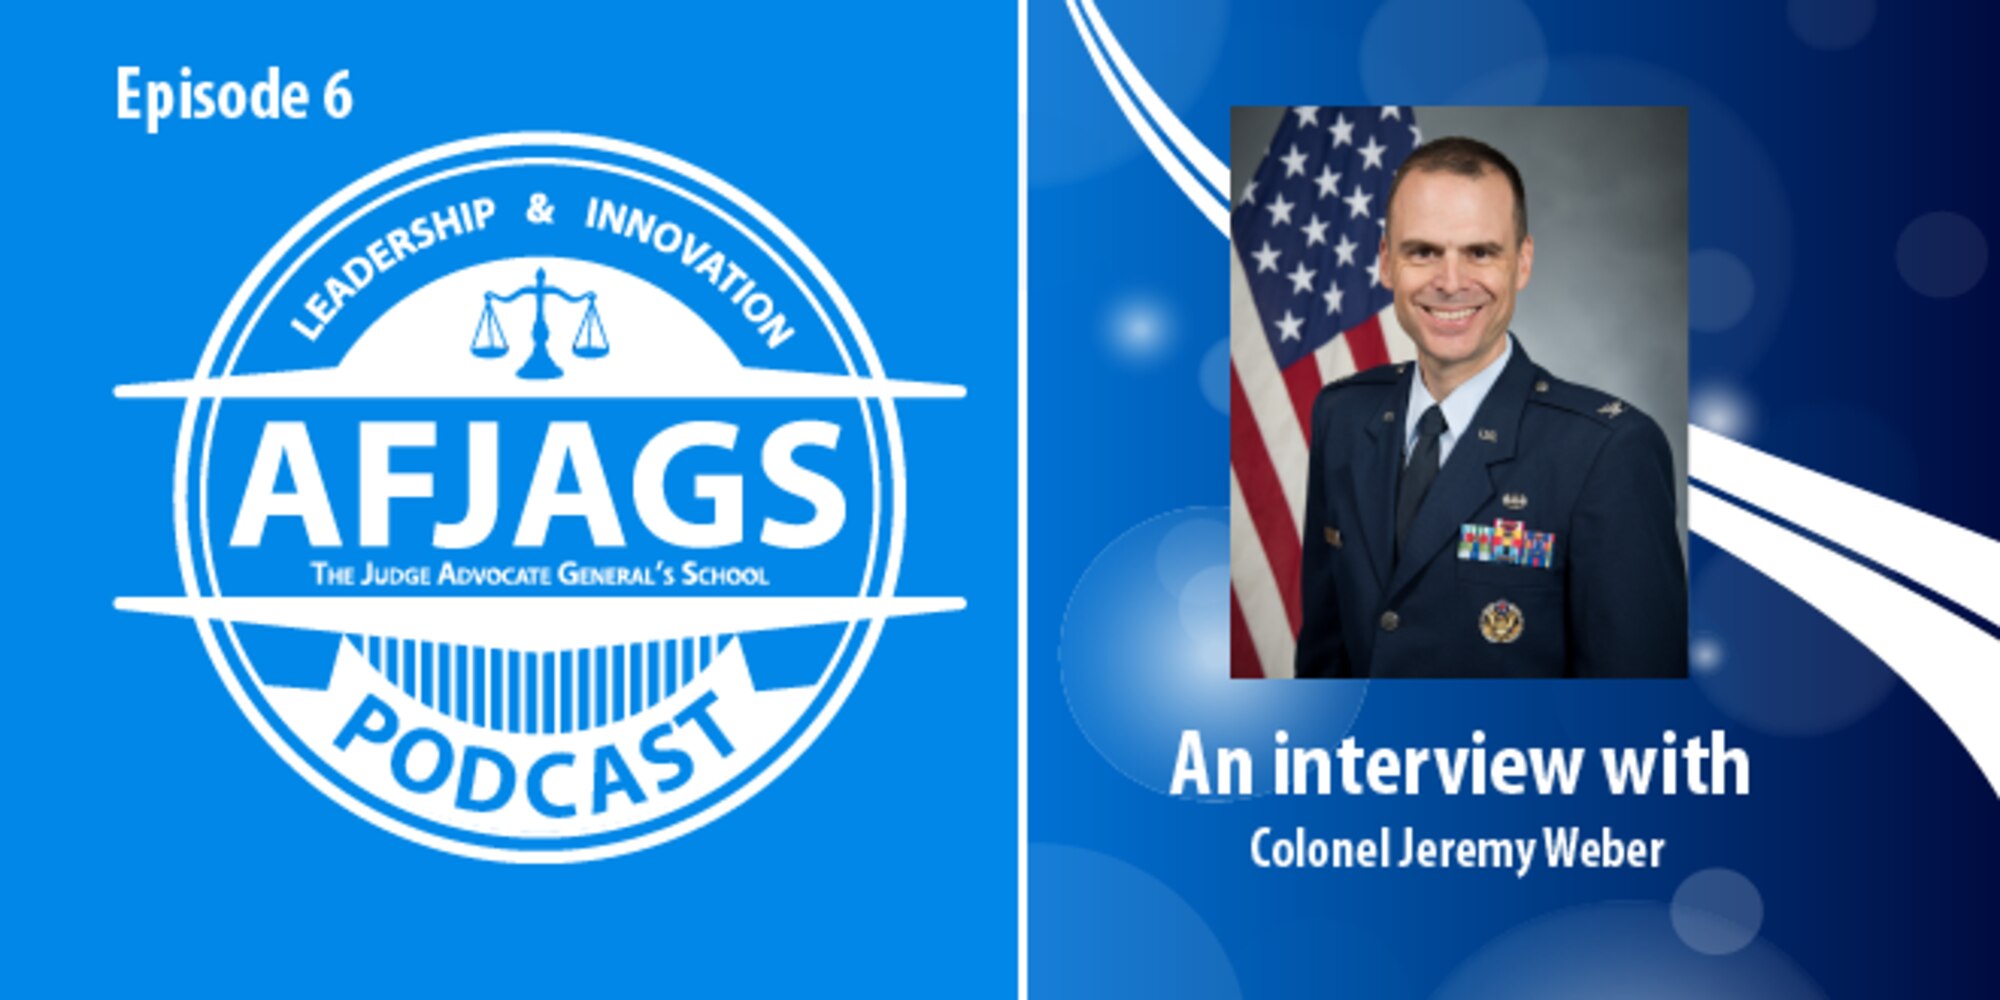 AFJAGS Podcast Episode 6, an interview with Colonel Jeremy Weber